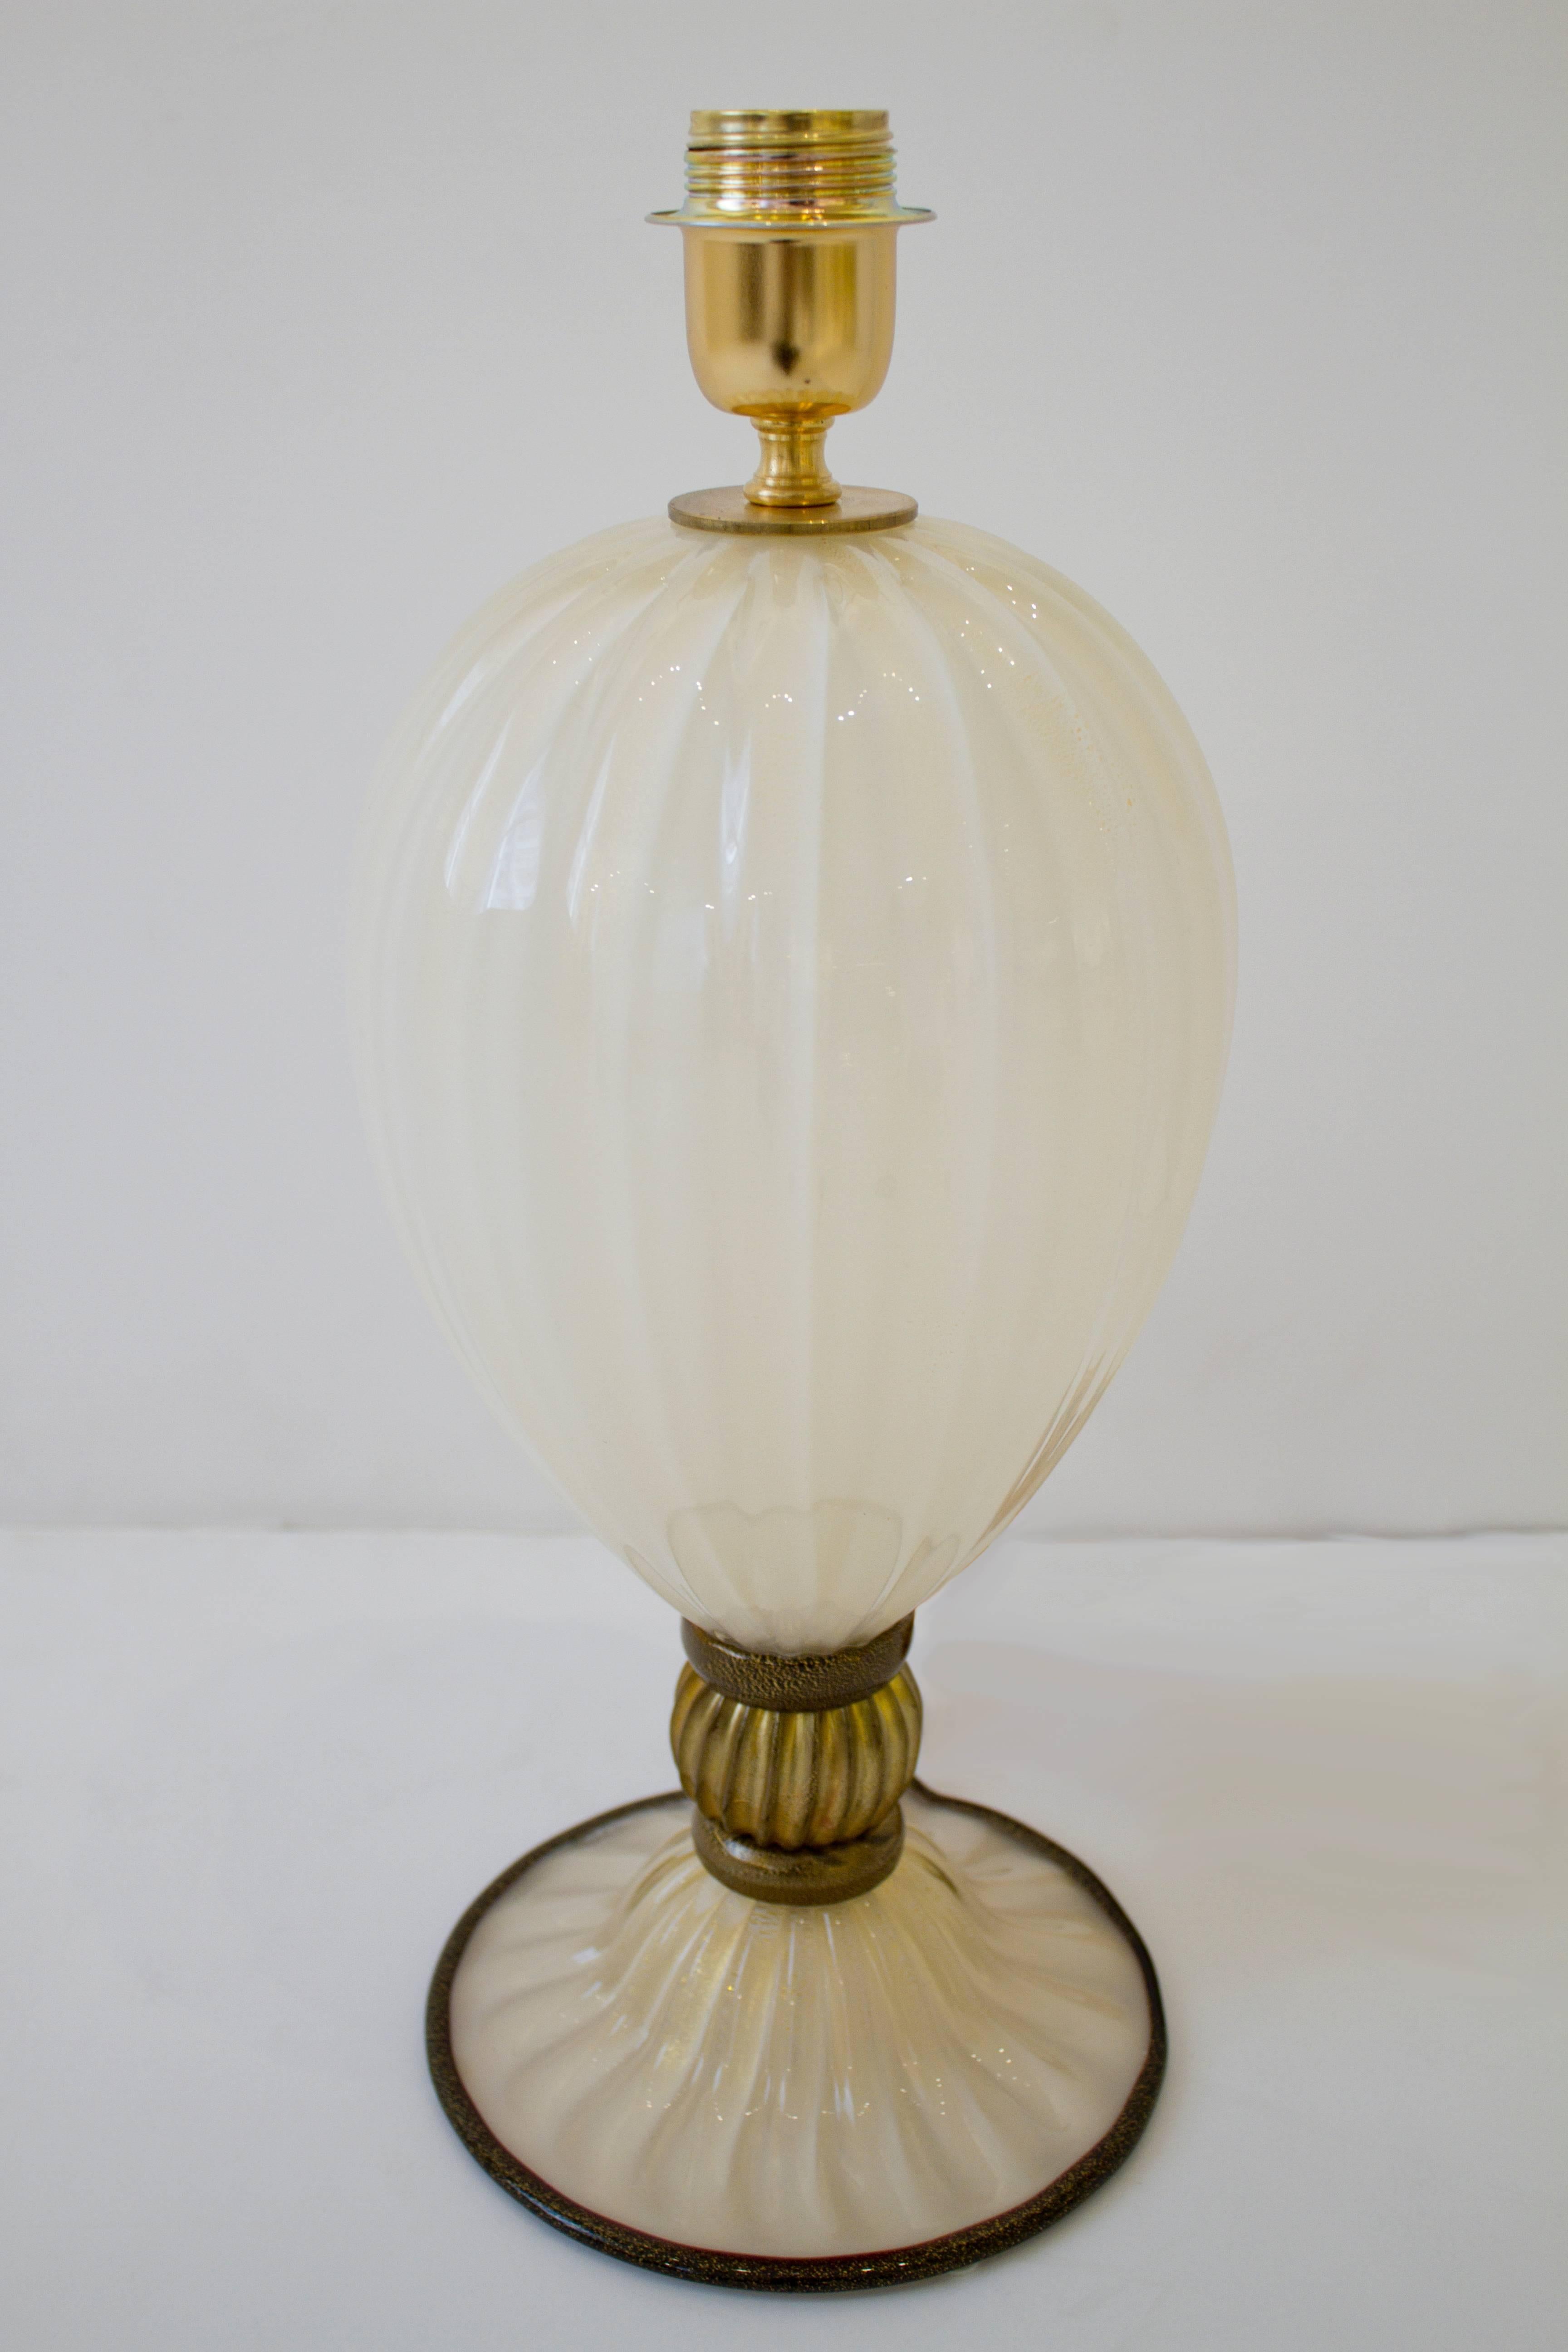 This pair of hand blown Murano glass lamps consist of shimmering Ivory glass base contrasted by a gold ridged sphere and dark bronze rings. 23-karat gold powder was infused in the ivory glass during the blowing process to create this shimmering